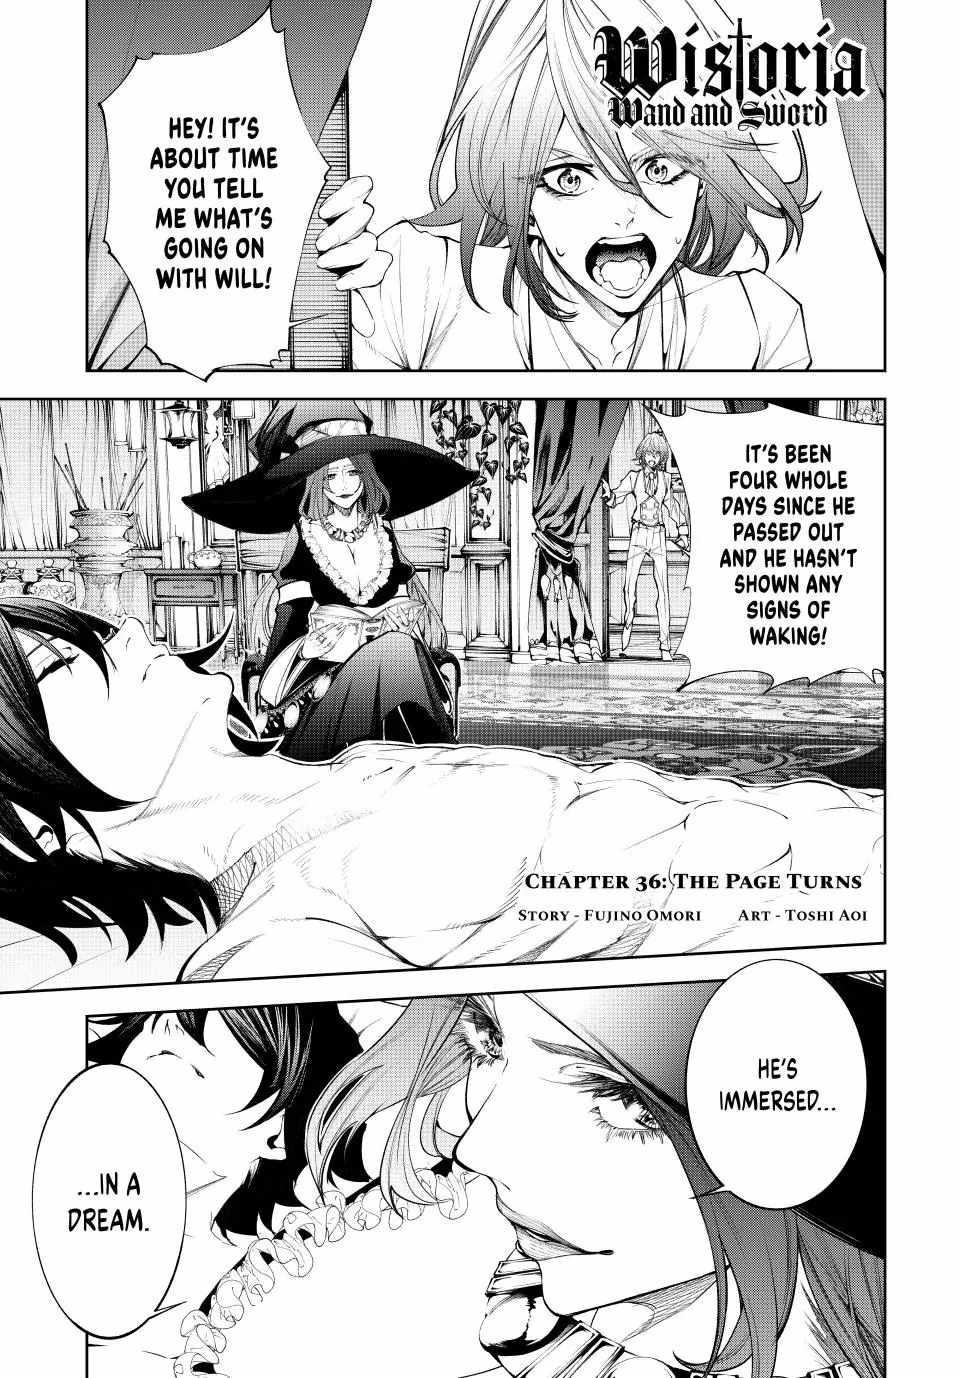 Wistoria's Wand And Sword Chapter 36 #2